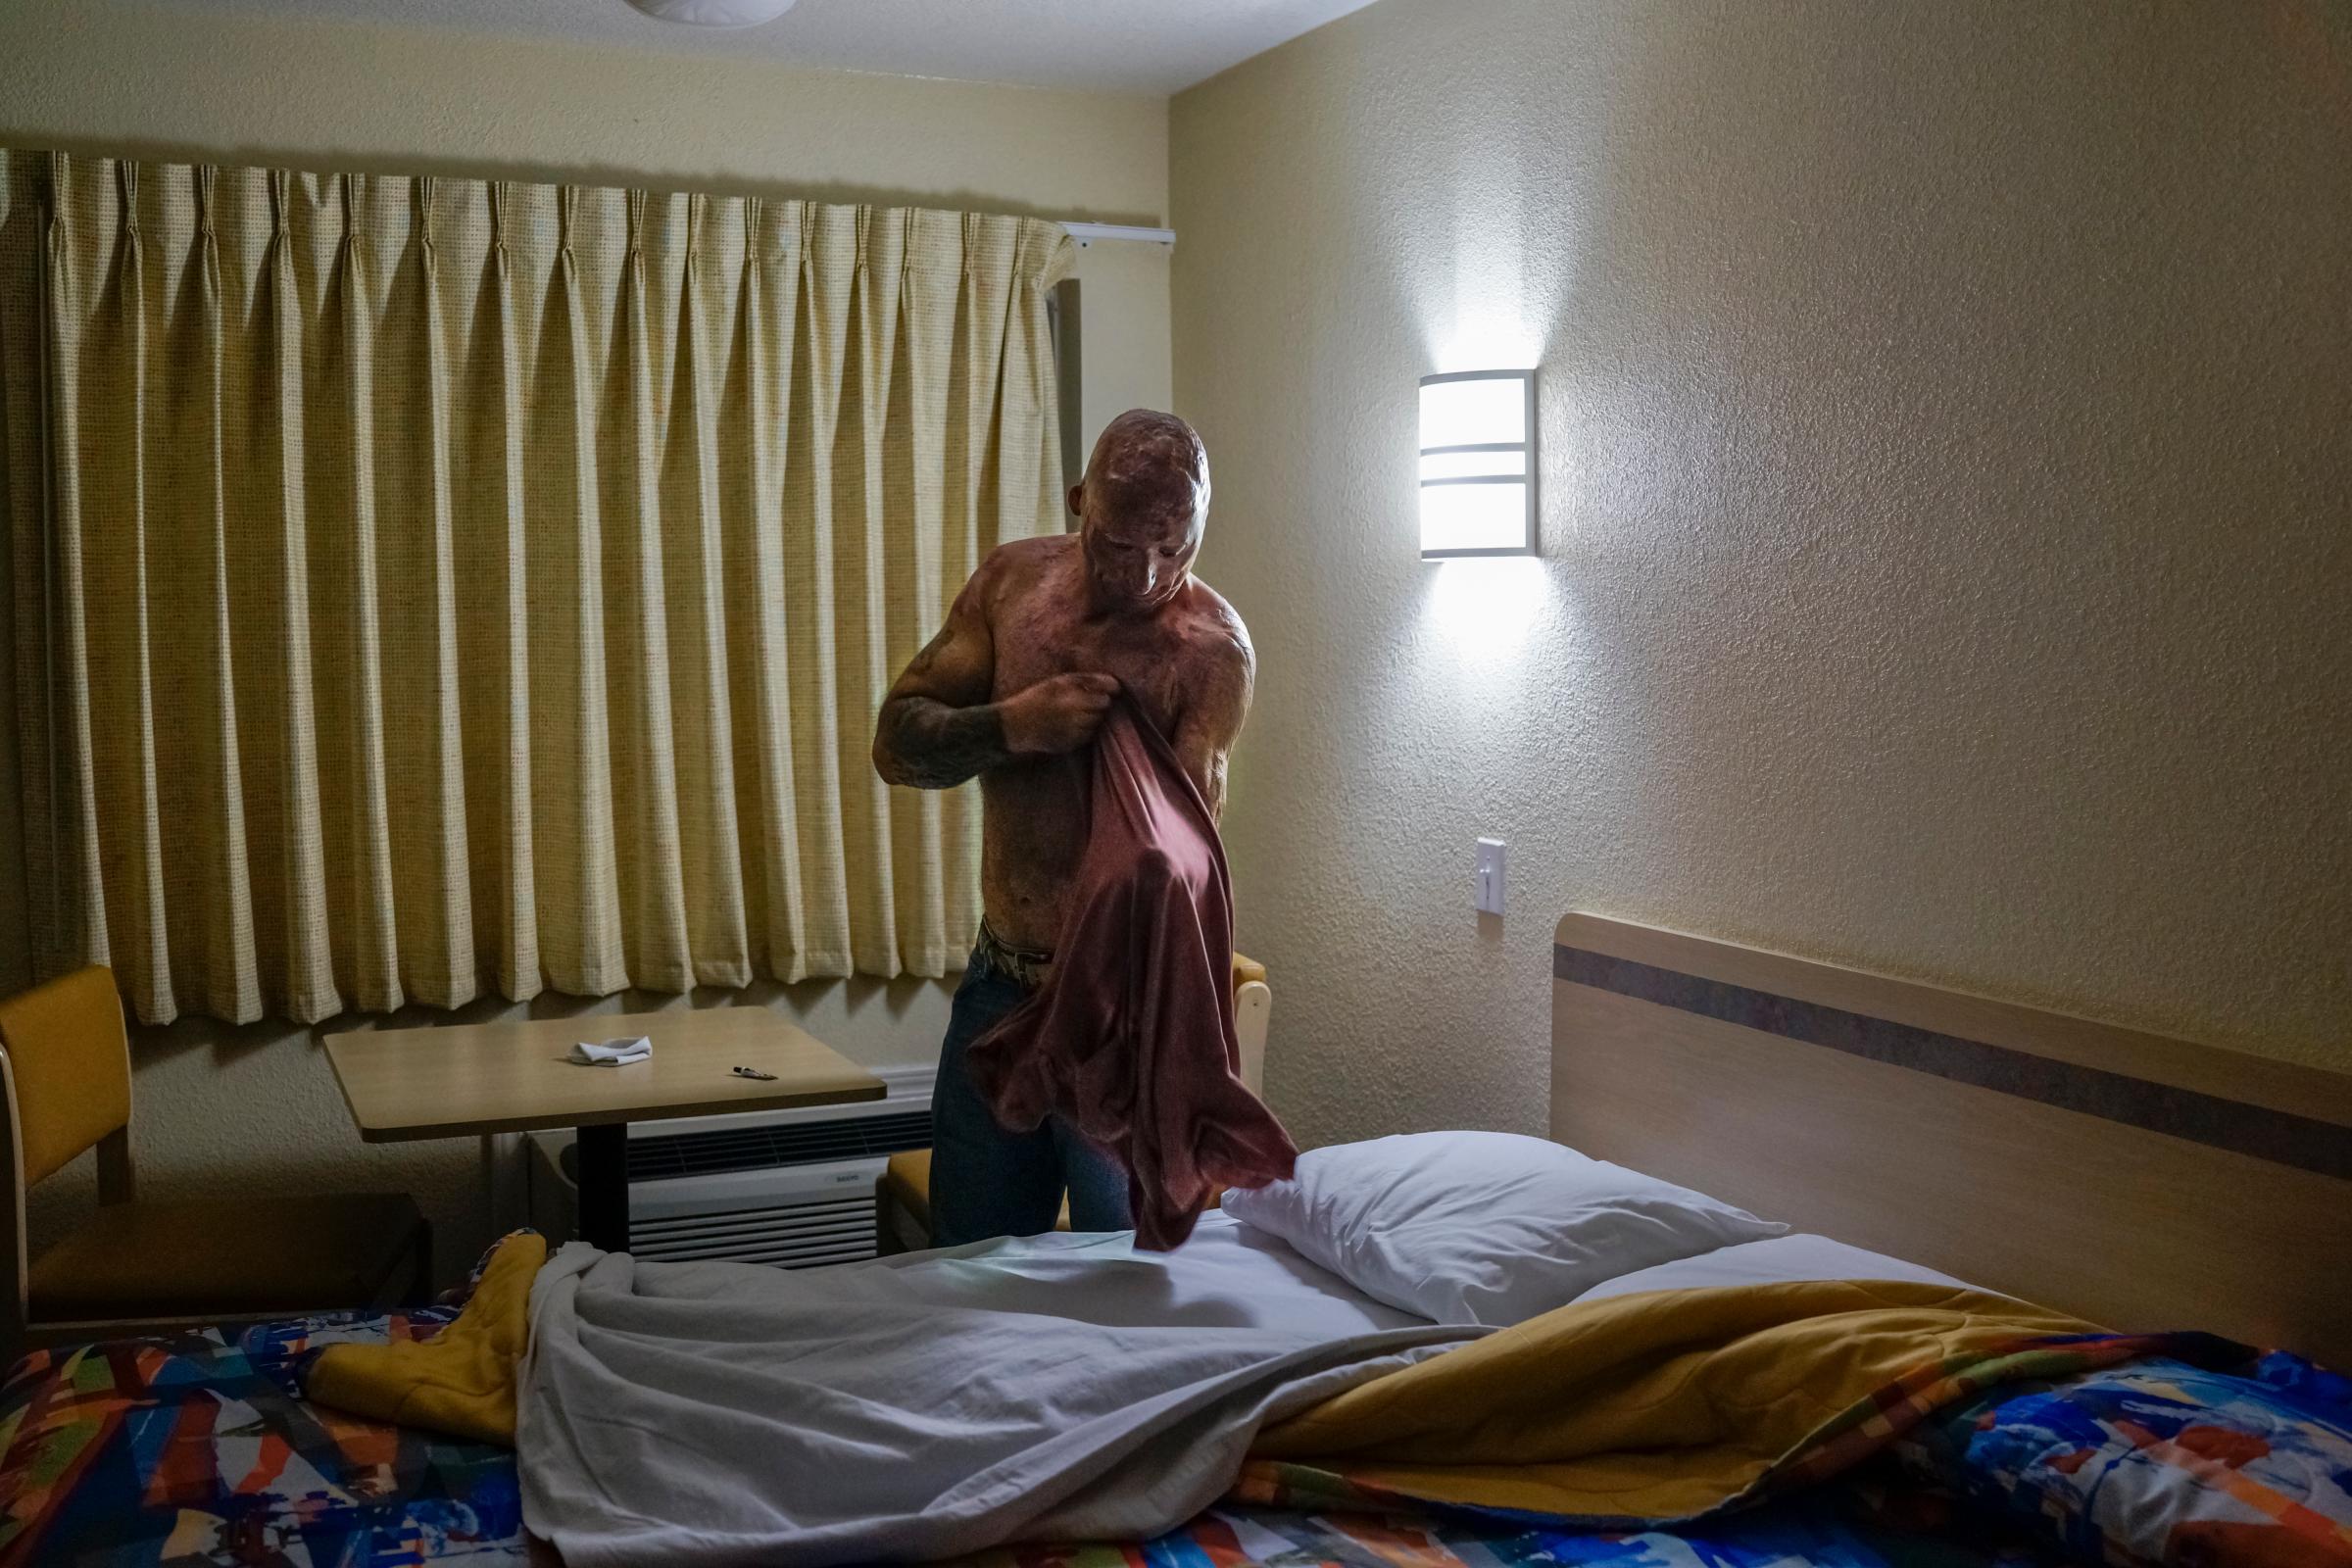 2013. Humble, TX. USA. Bobby gets ready for bed at a Motel 6. Bobby Henline, 41, veteran of four tours to Iraq and sole survivor of an IED blast that killed the other four soldiers in his humvee in Iraq in 2007. He is now a standup comedian launching a new career with a routine built around his injuries. He received burns over 38% of his body in the blast.